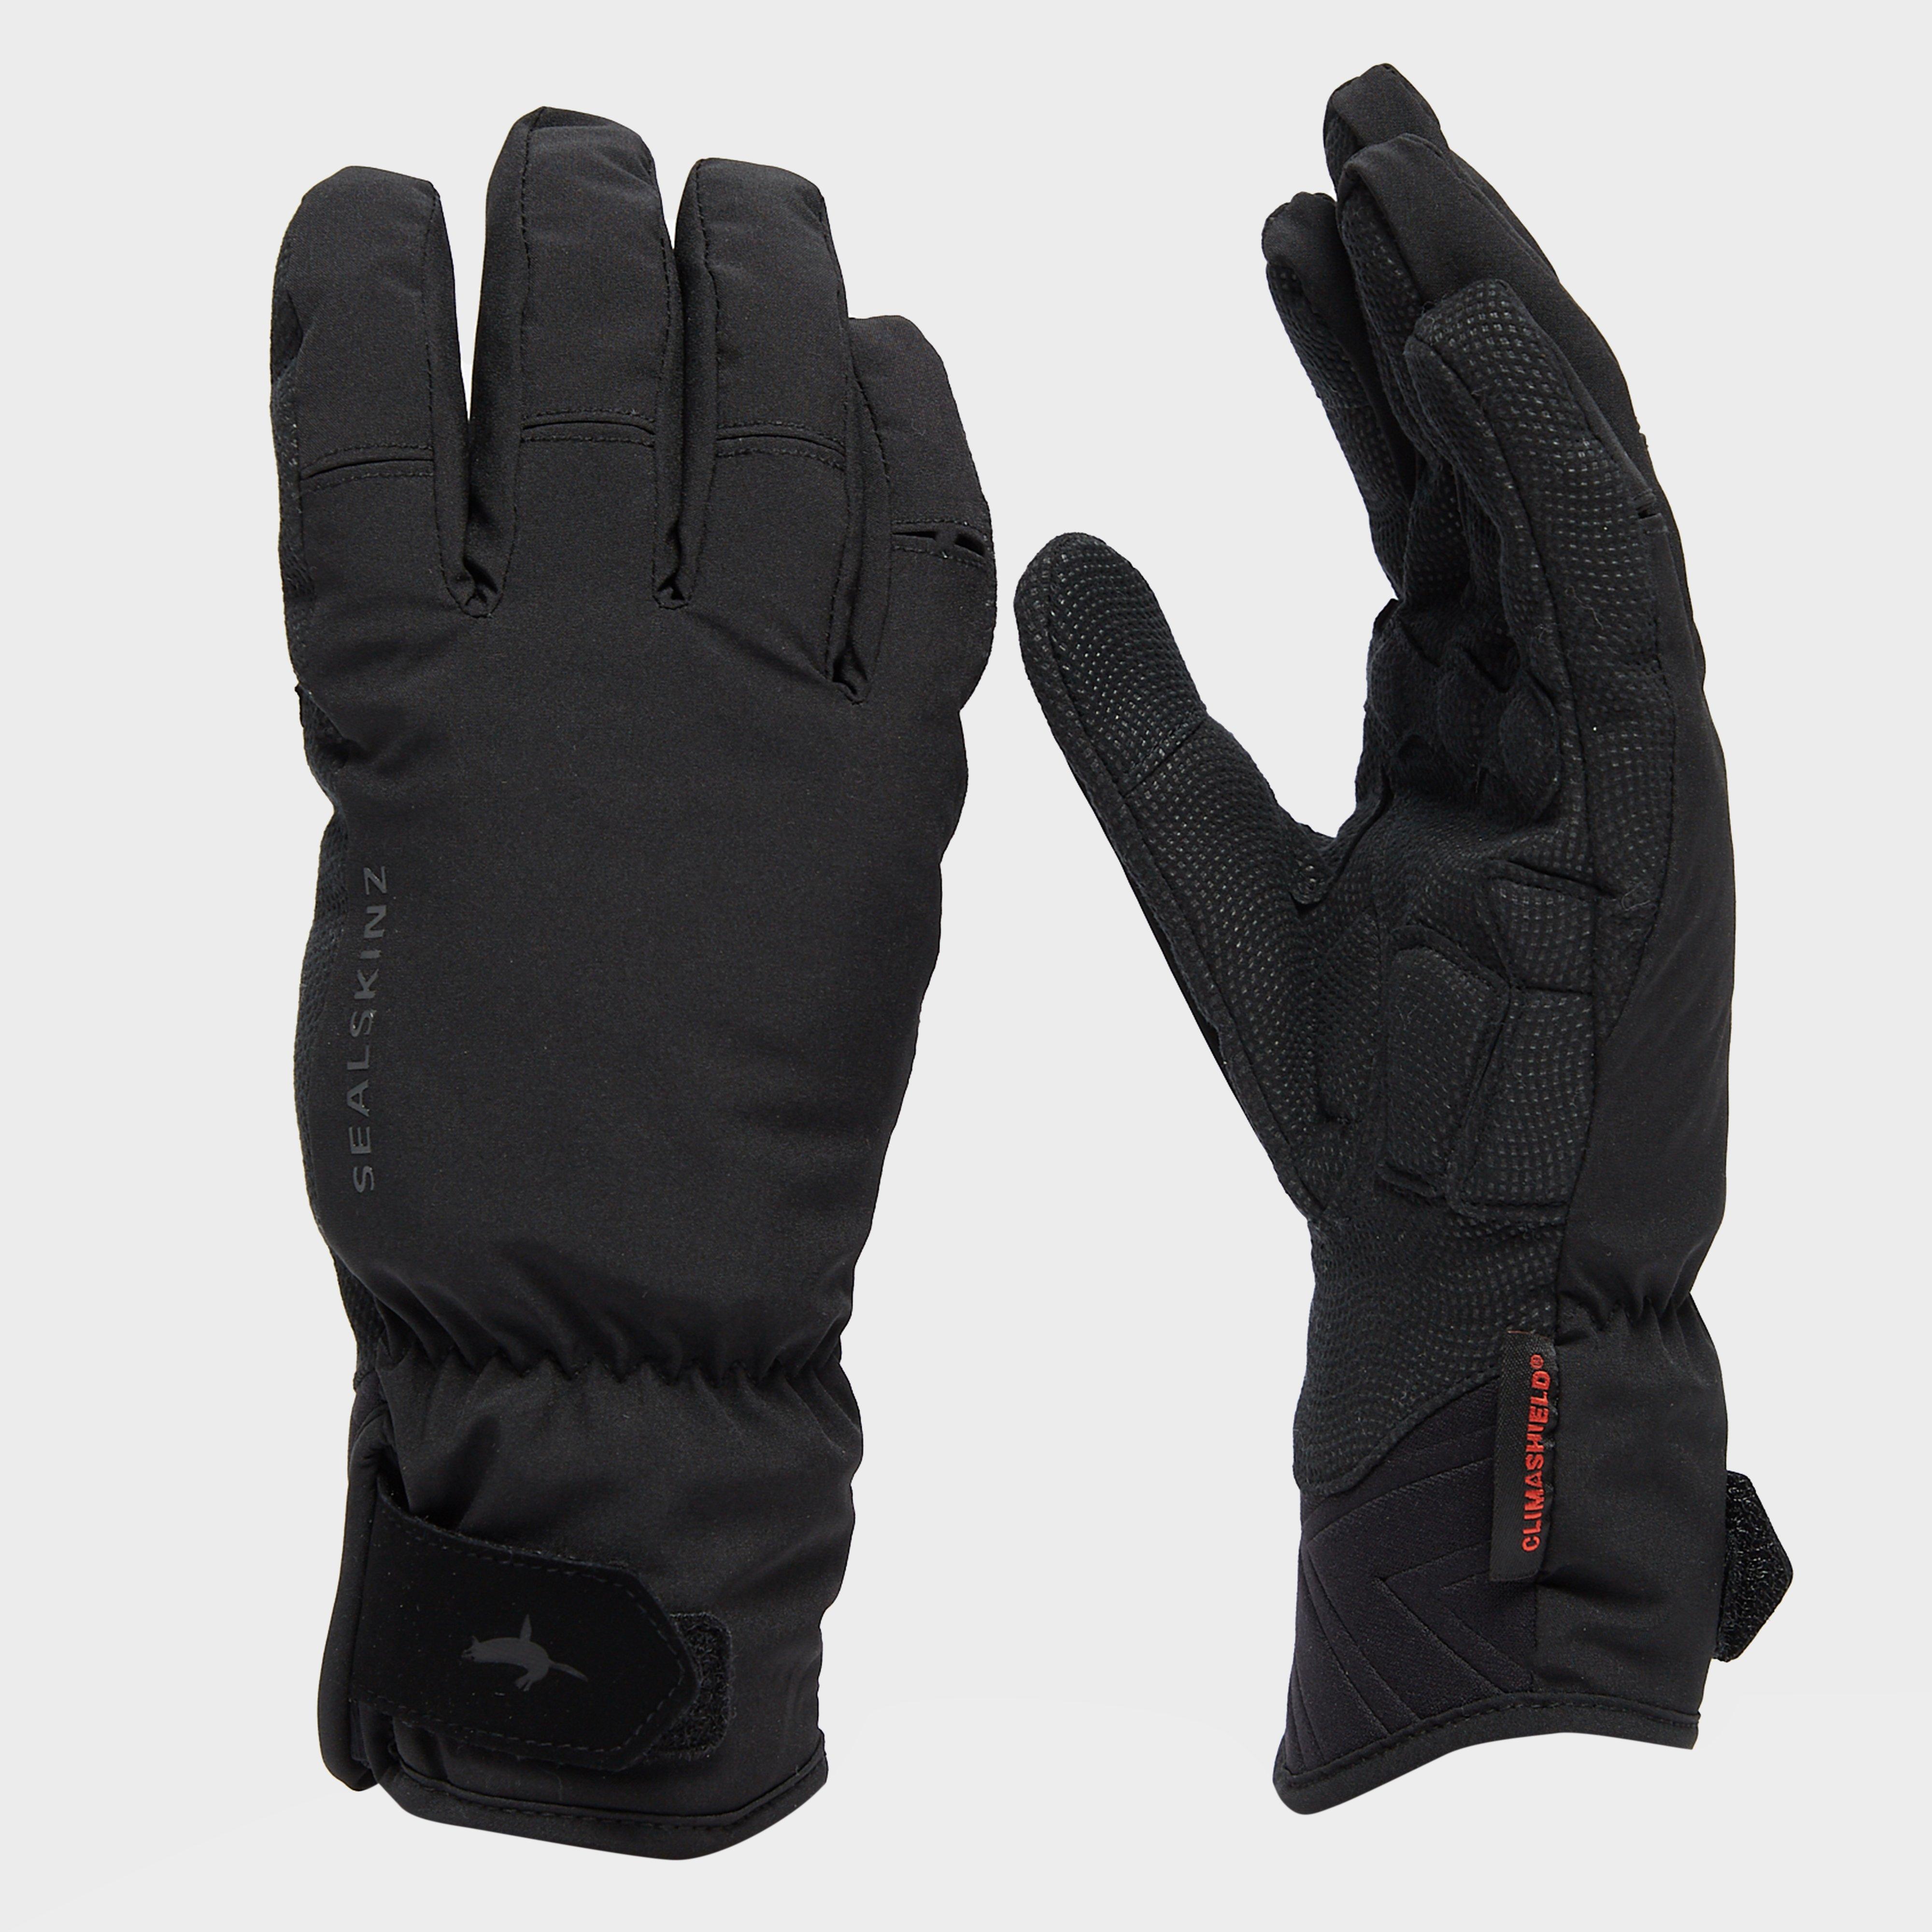 Waterproof Extreme Cold Gloves - Black